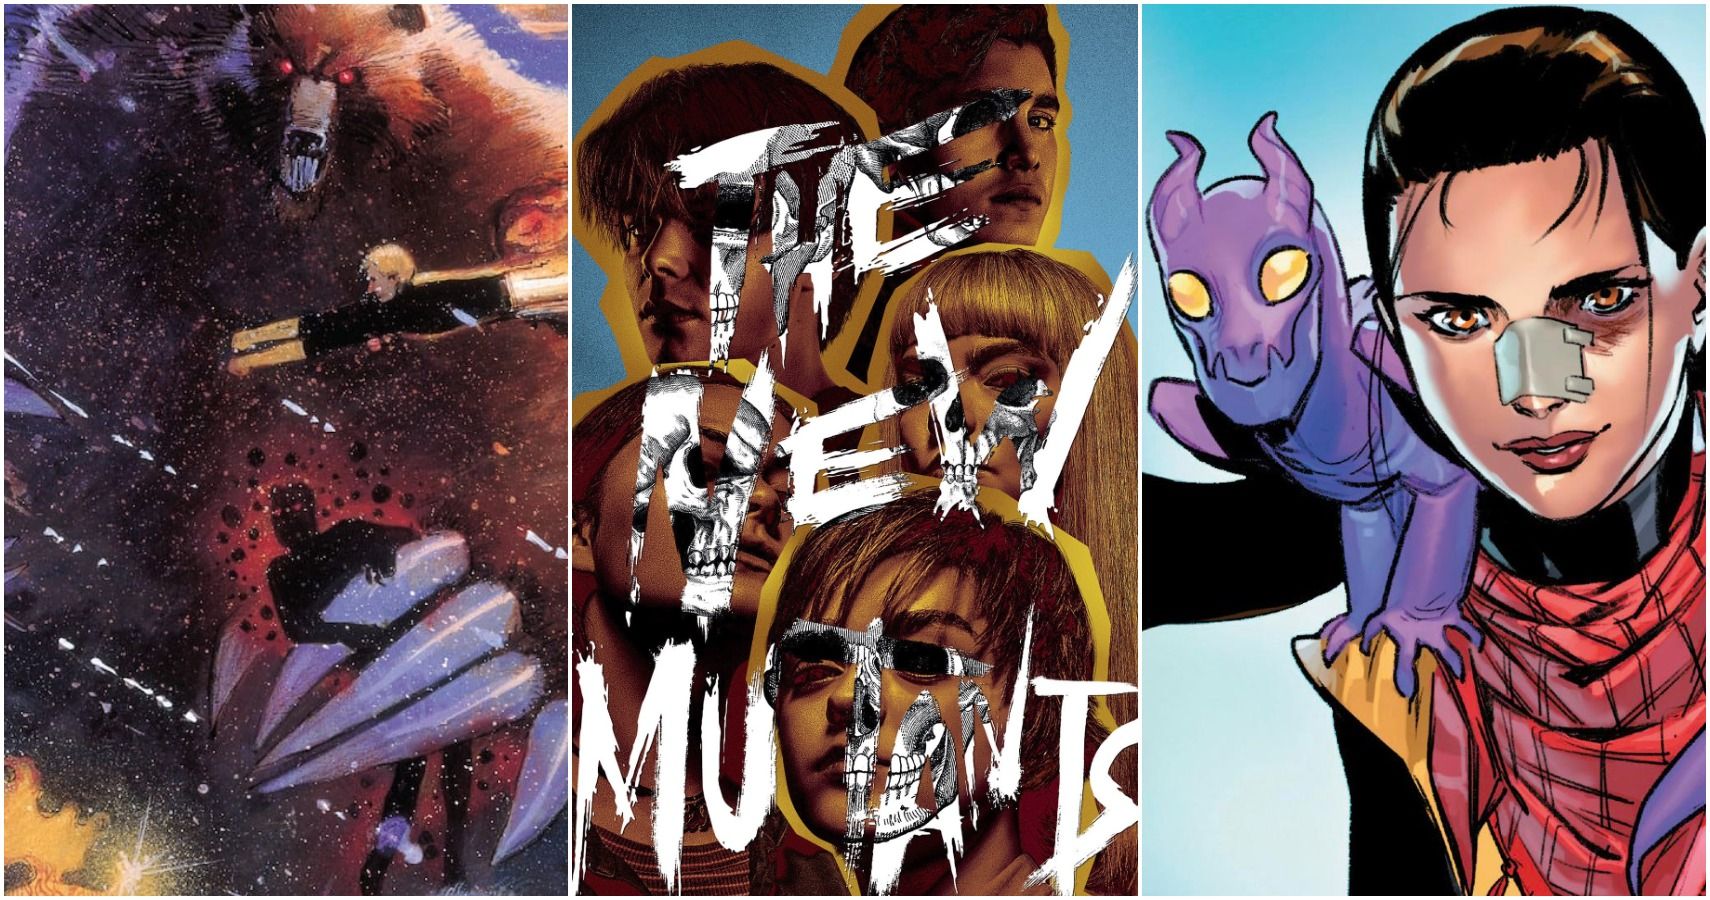 Easter Eggs You Missed In The New Mutants